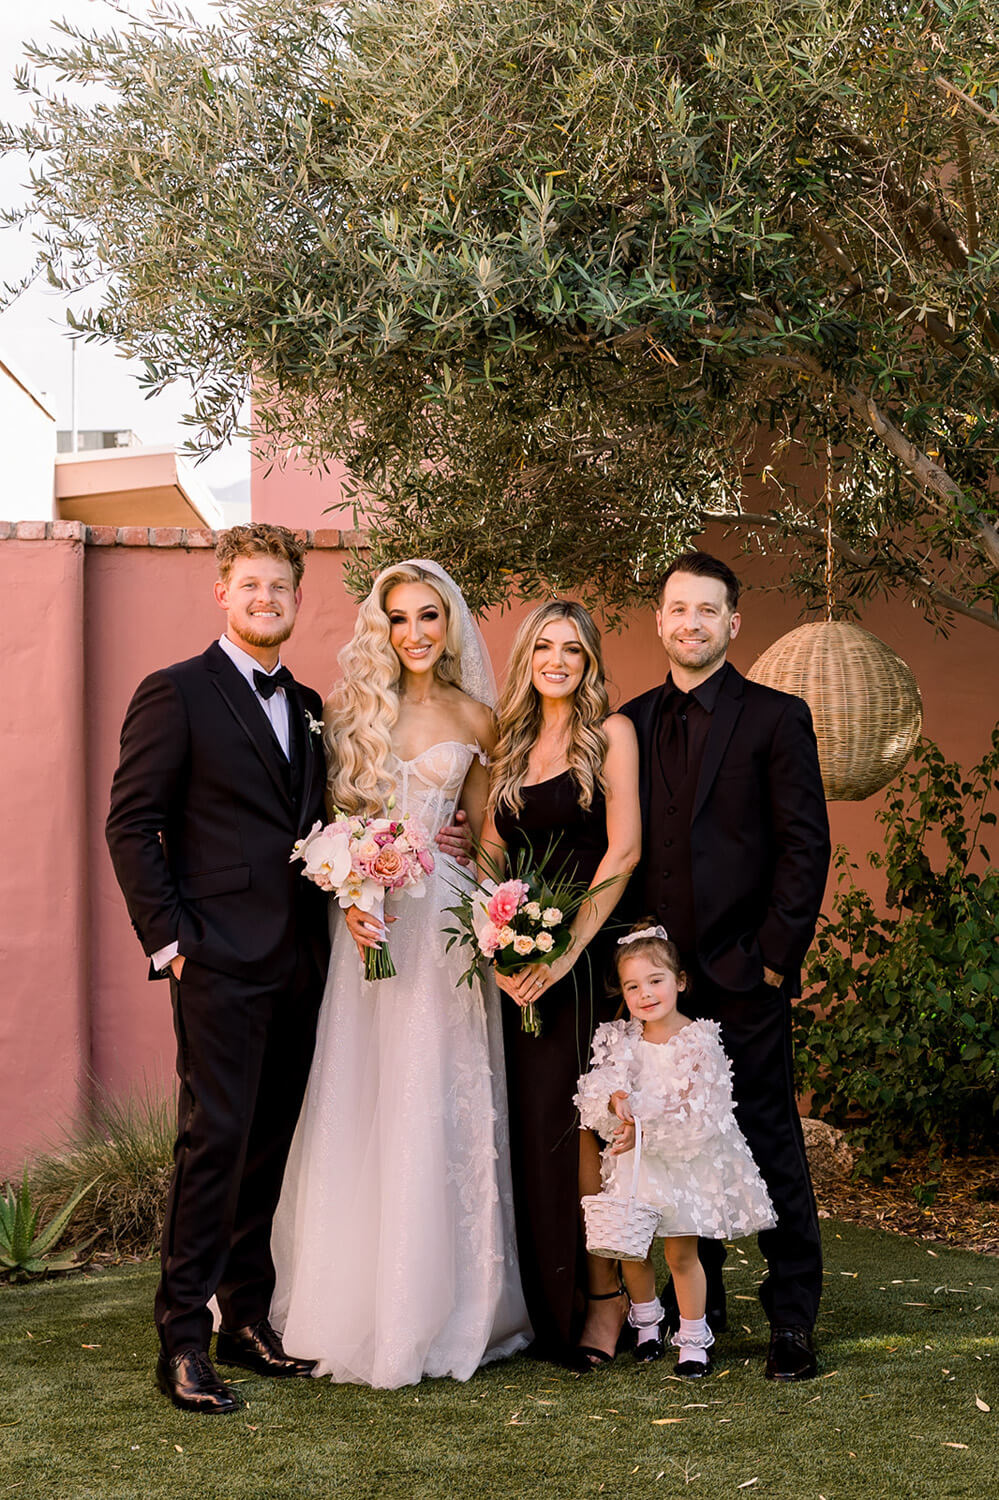 Family wedding portrait at The Sands Hotel Palm Springs